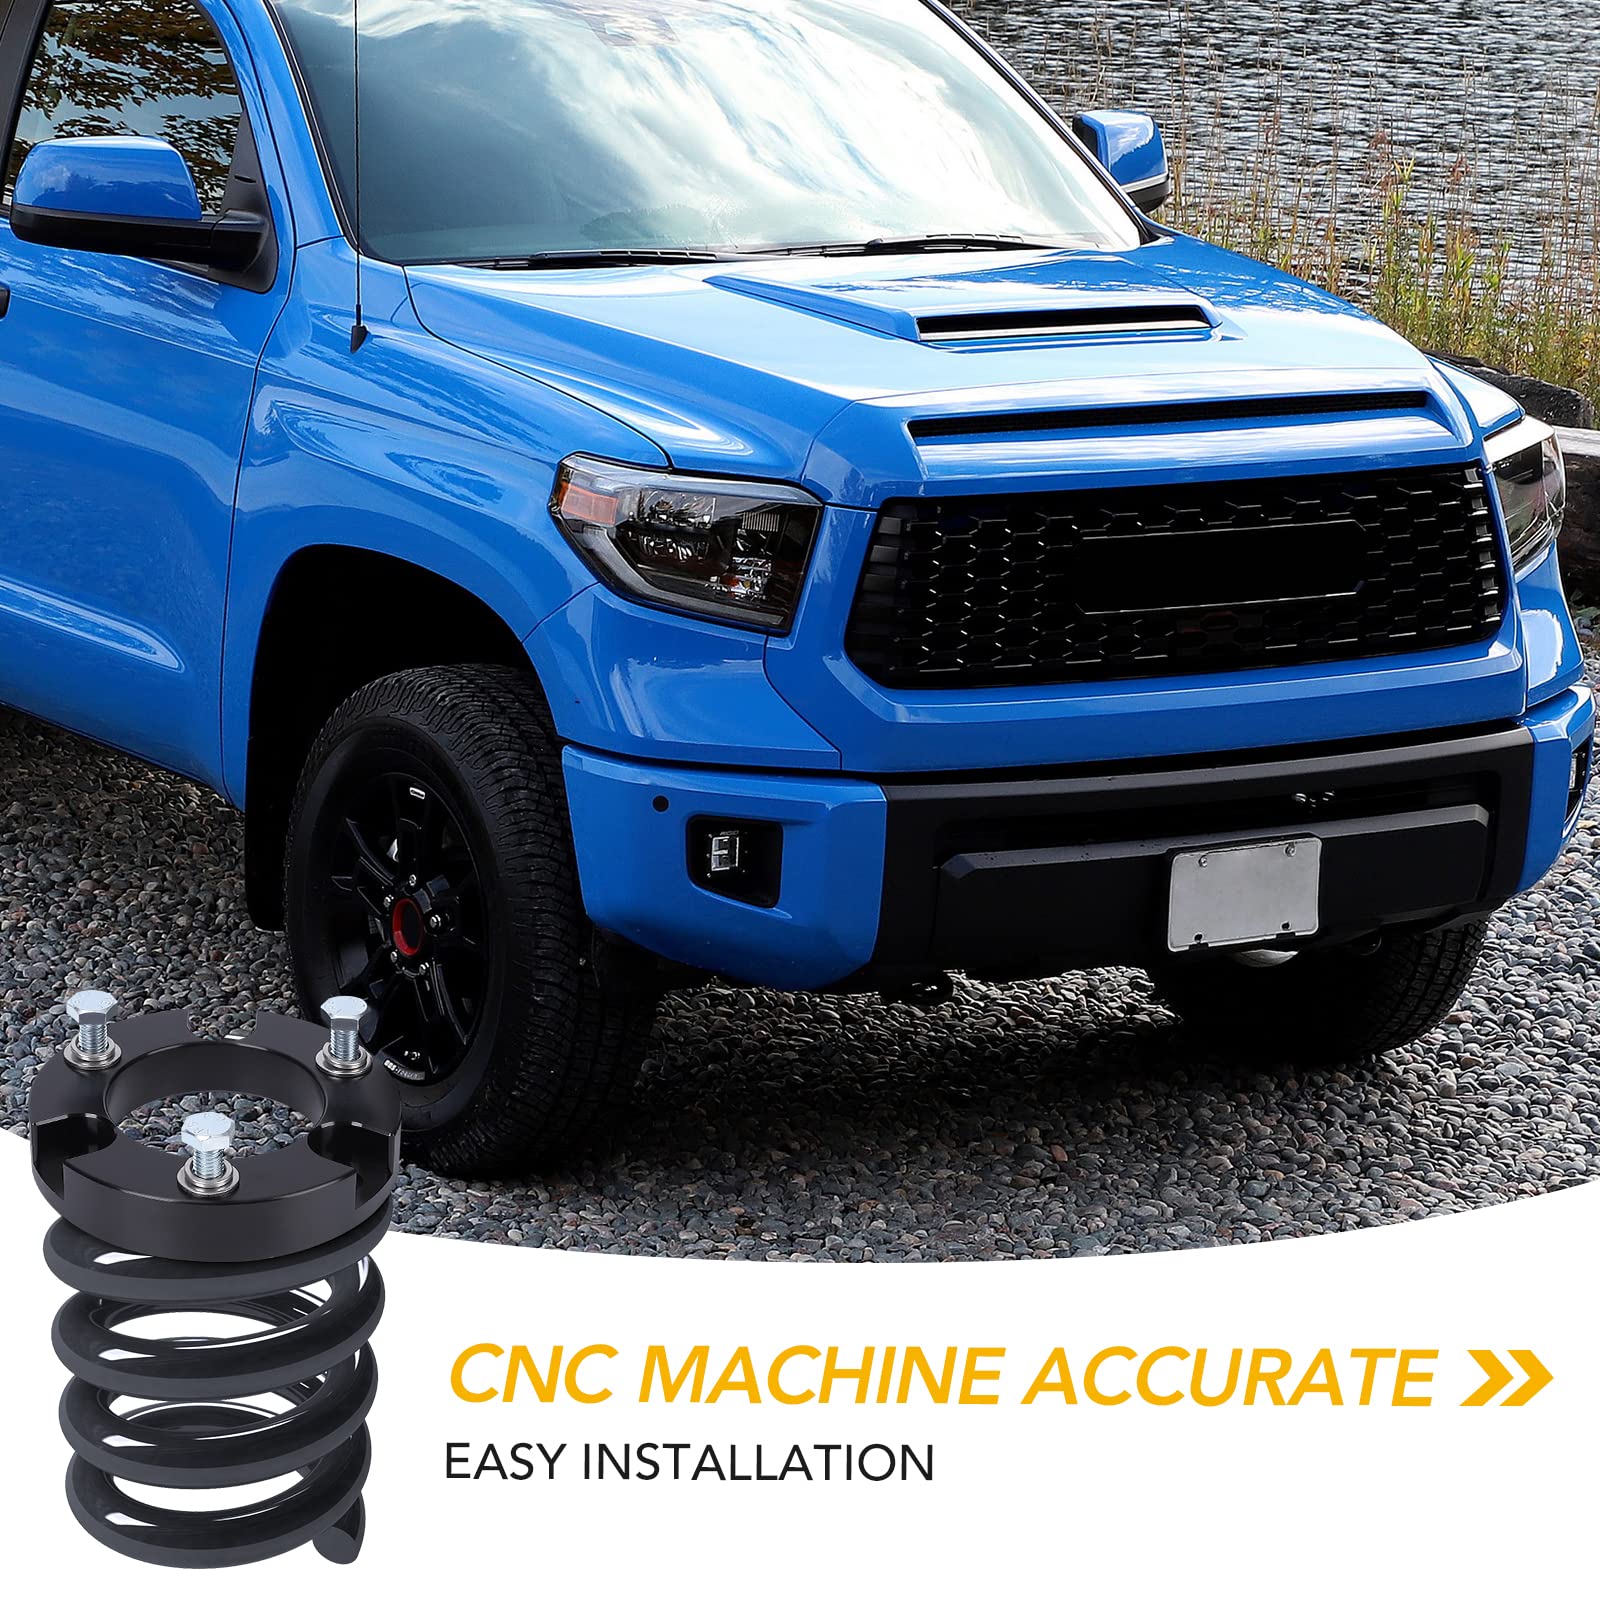 2 Inch Leveling Lift Kits Front Strut Spacer for 99-06 Tundra